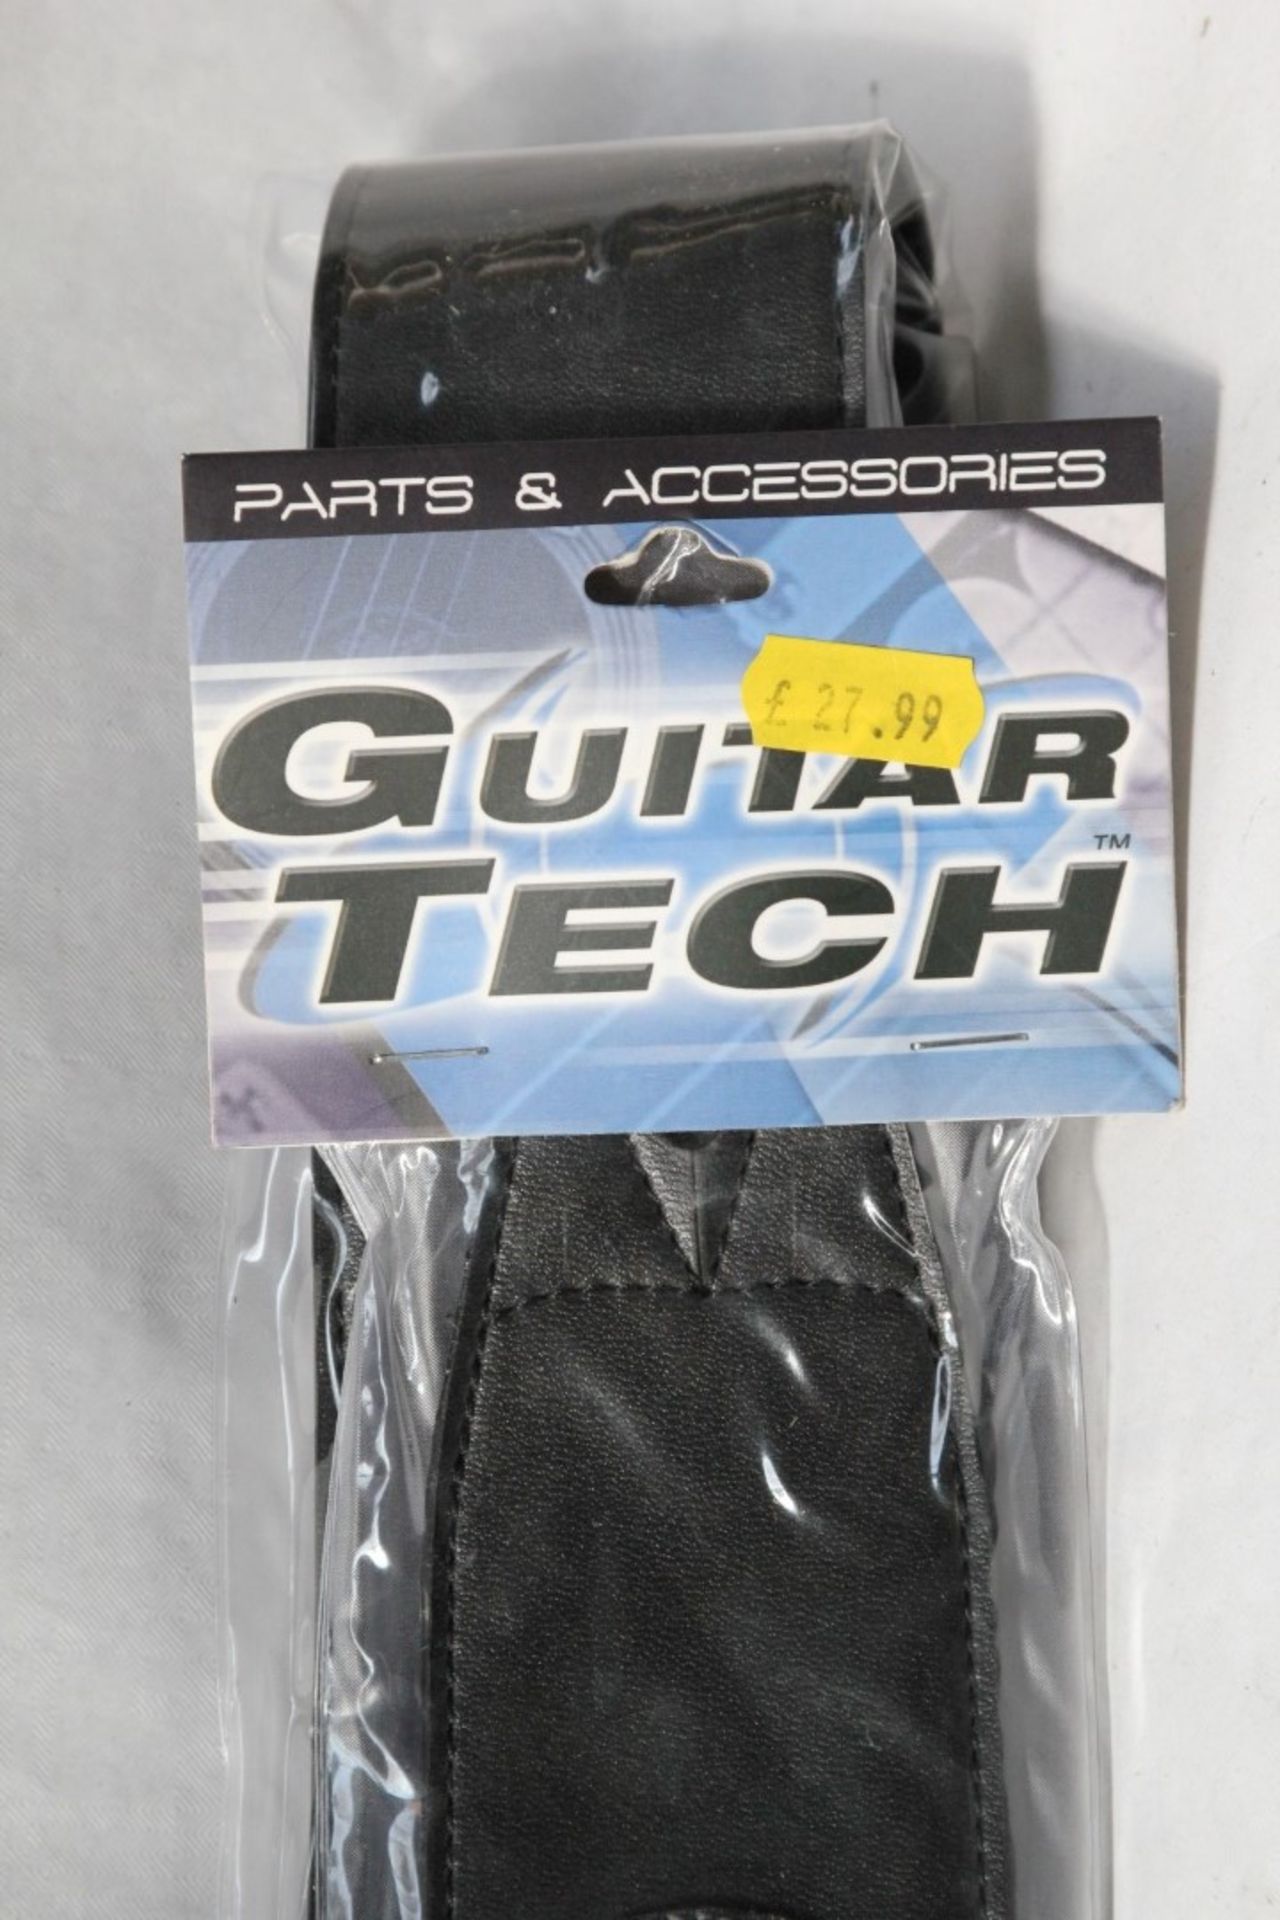 1 x Guitar Tech Leather Studded Guitar Strap - New in Packet - CL020 - Ref Pro173 - Location: Altrin - Image 7 of 8